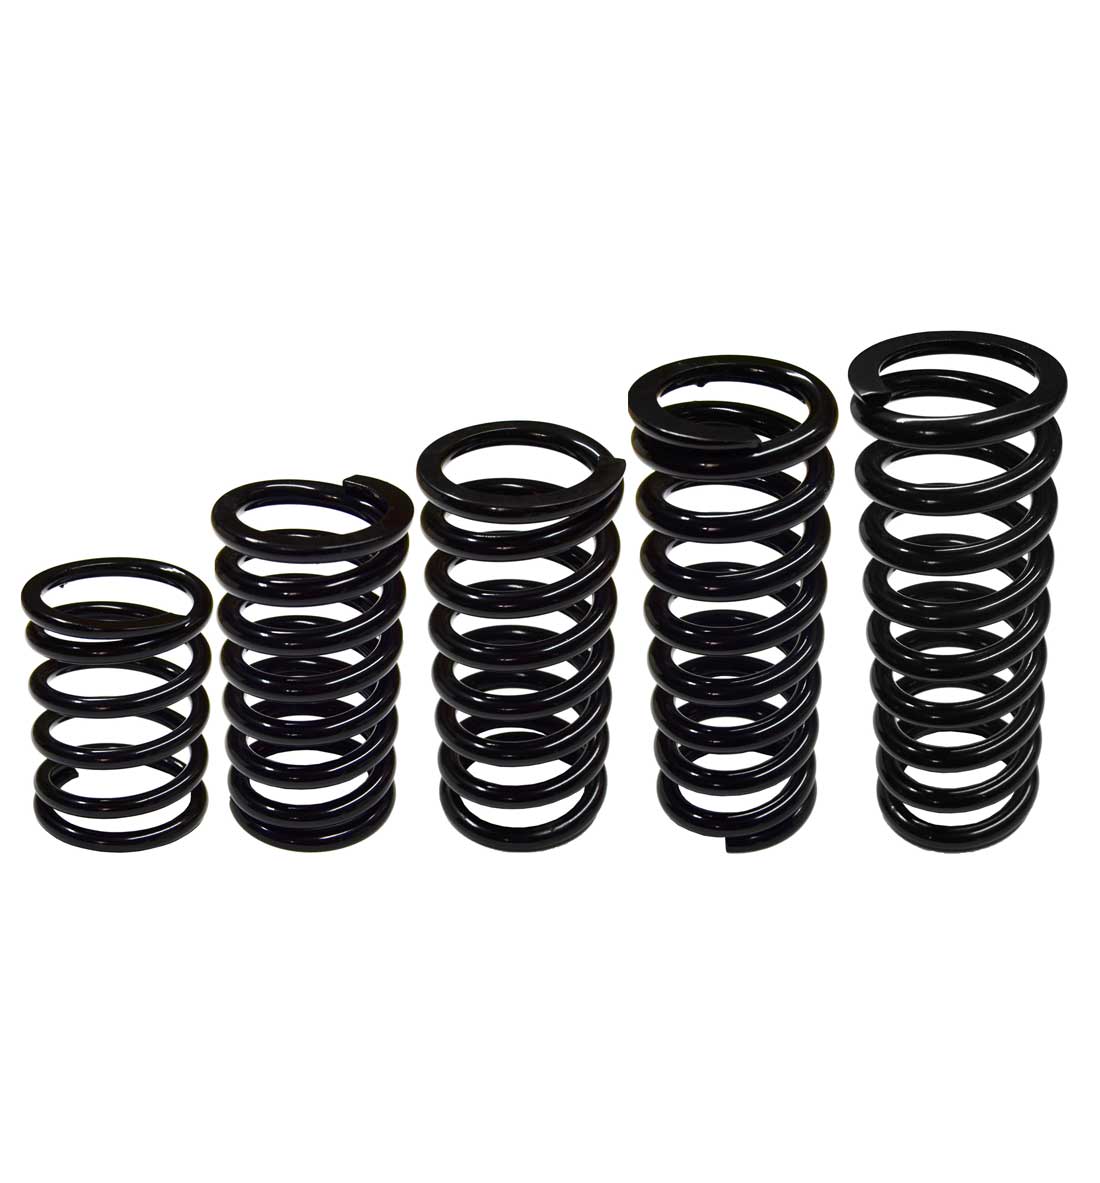 ROK Coil Spring 2.25 ID, 9 length, 350lbs/in